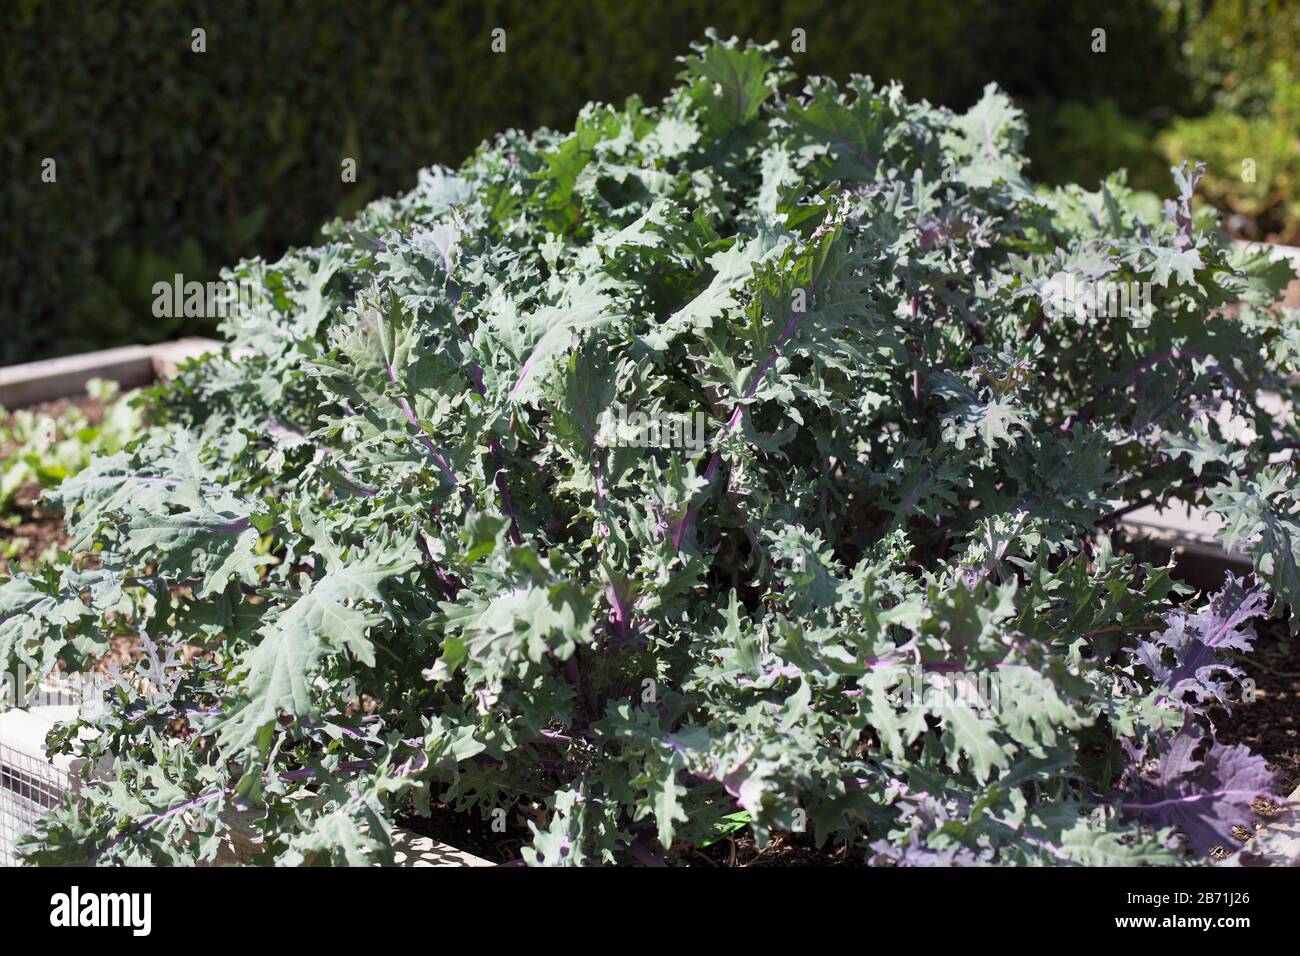 Kale 'Red Russian'. Stock Photo